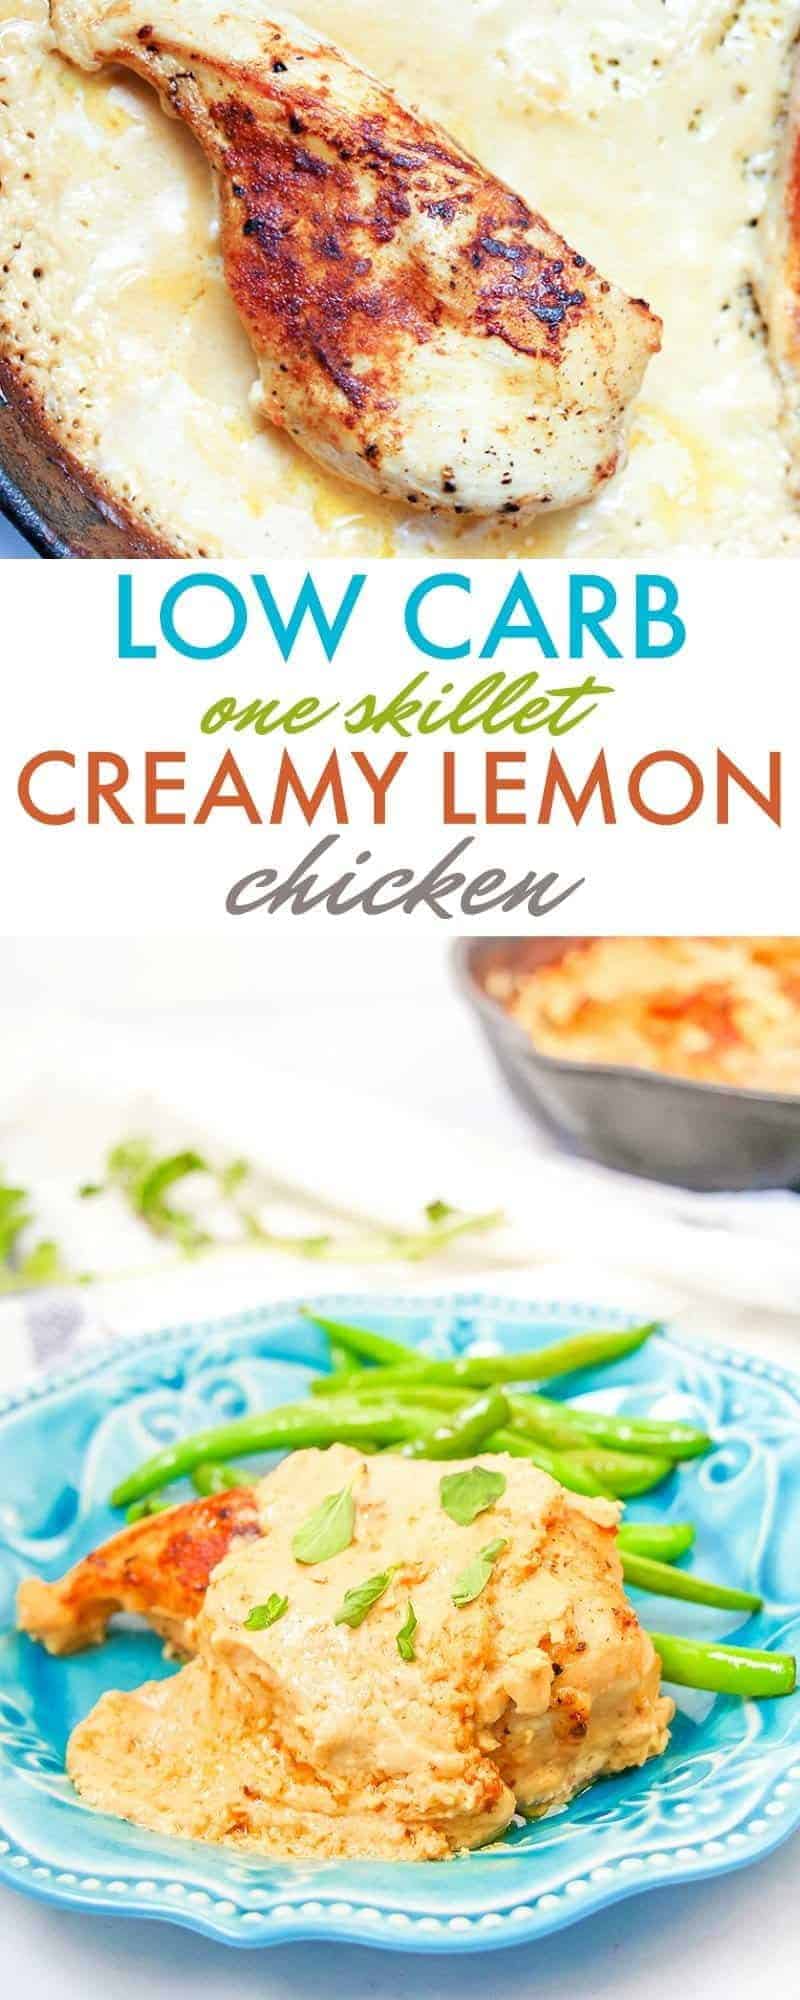 This rich and tart low carb creamy lemon chicken recipe is made in one skillet and is a delicious weekday keto dinner for busy schedules.